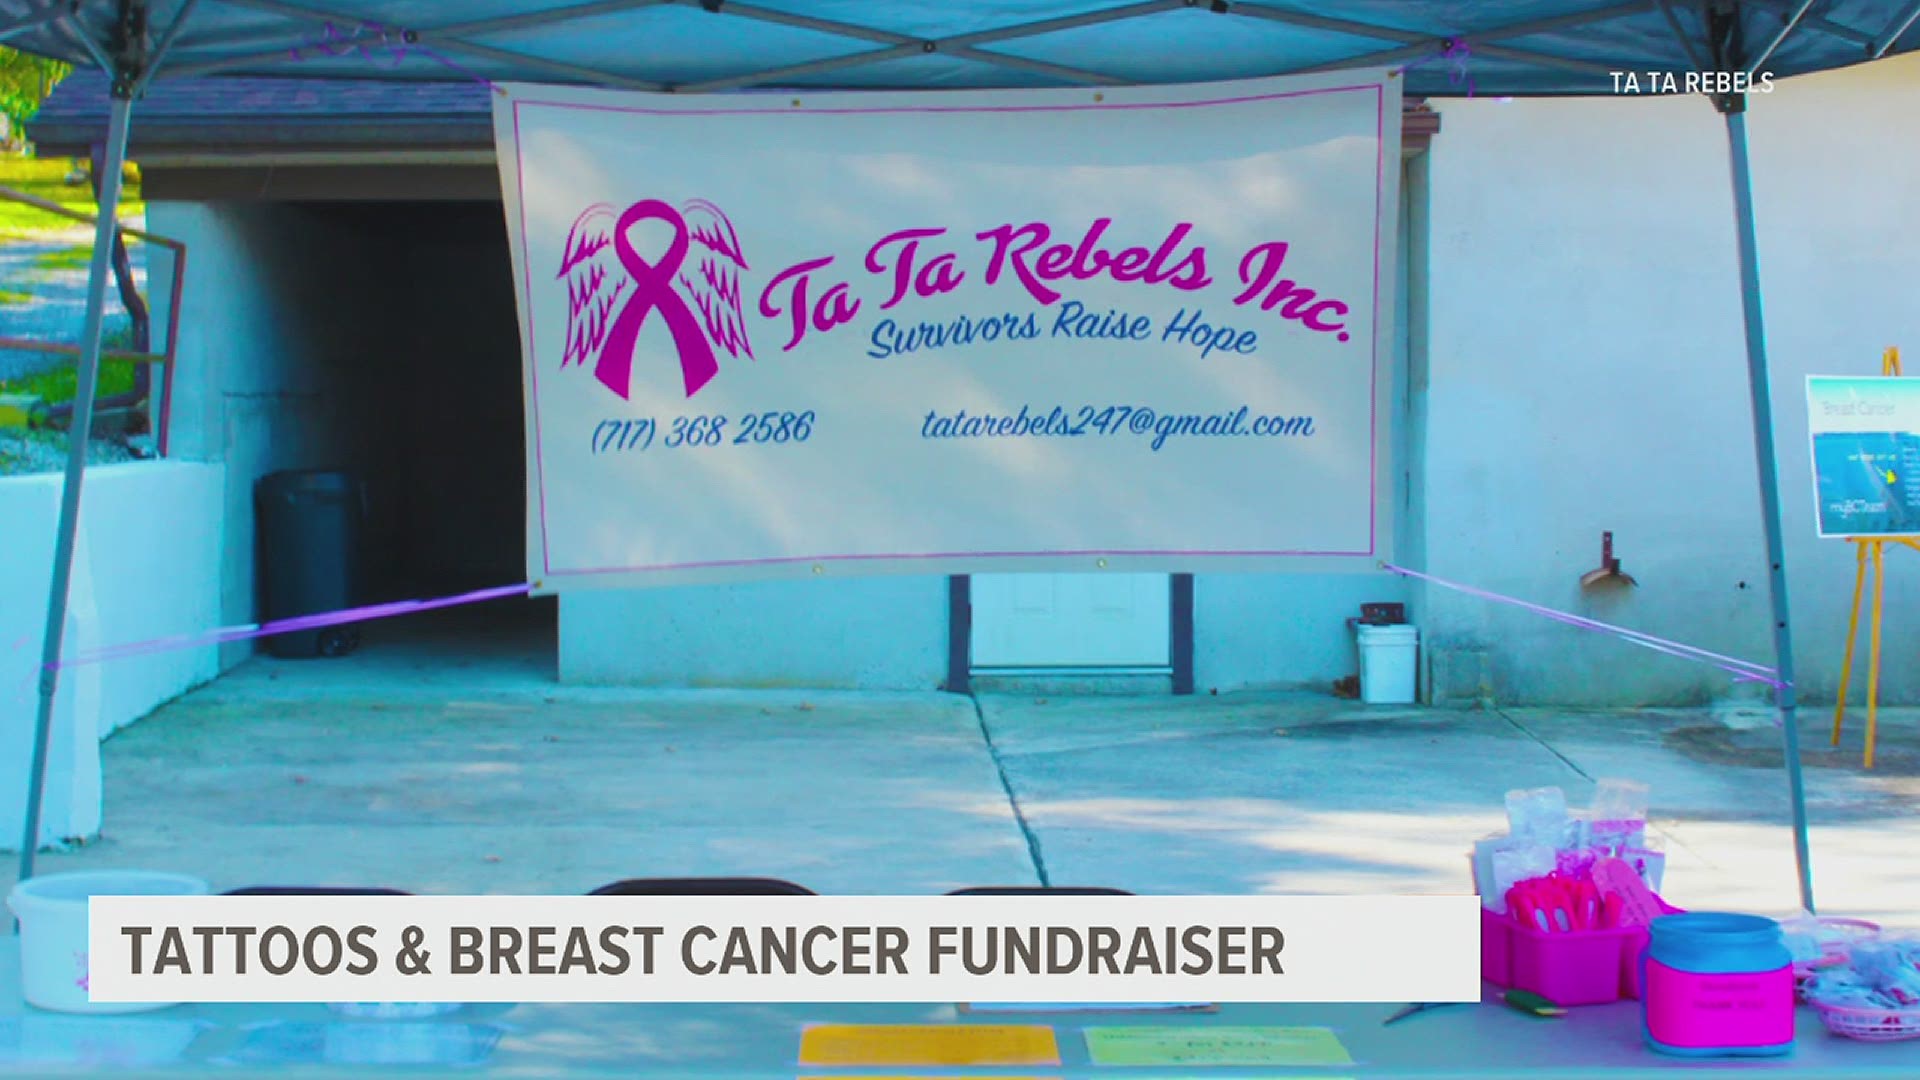 A portion of money raised by the tattoos will go to the Ta-Ta rebels, a local breast cancer survivors group